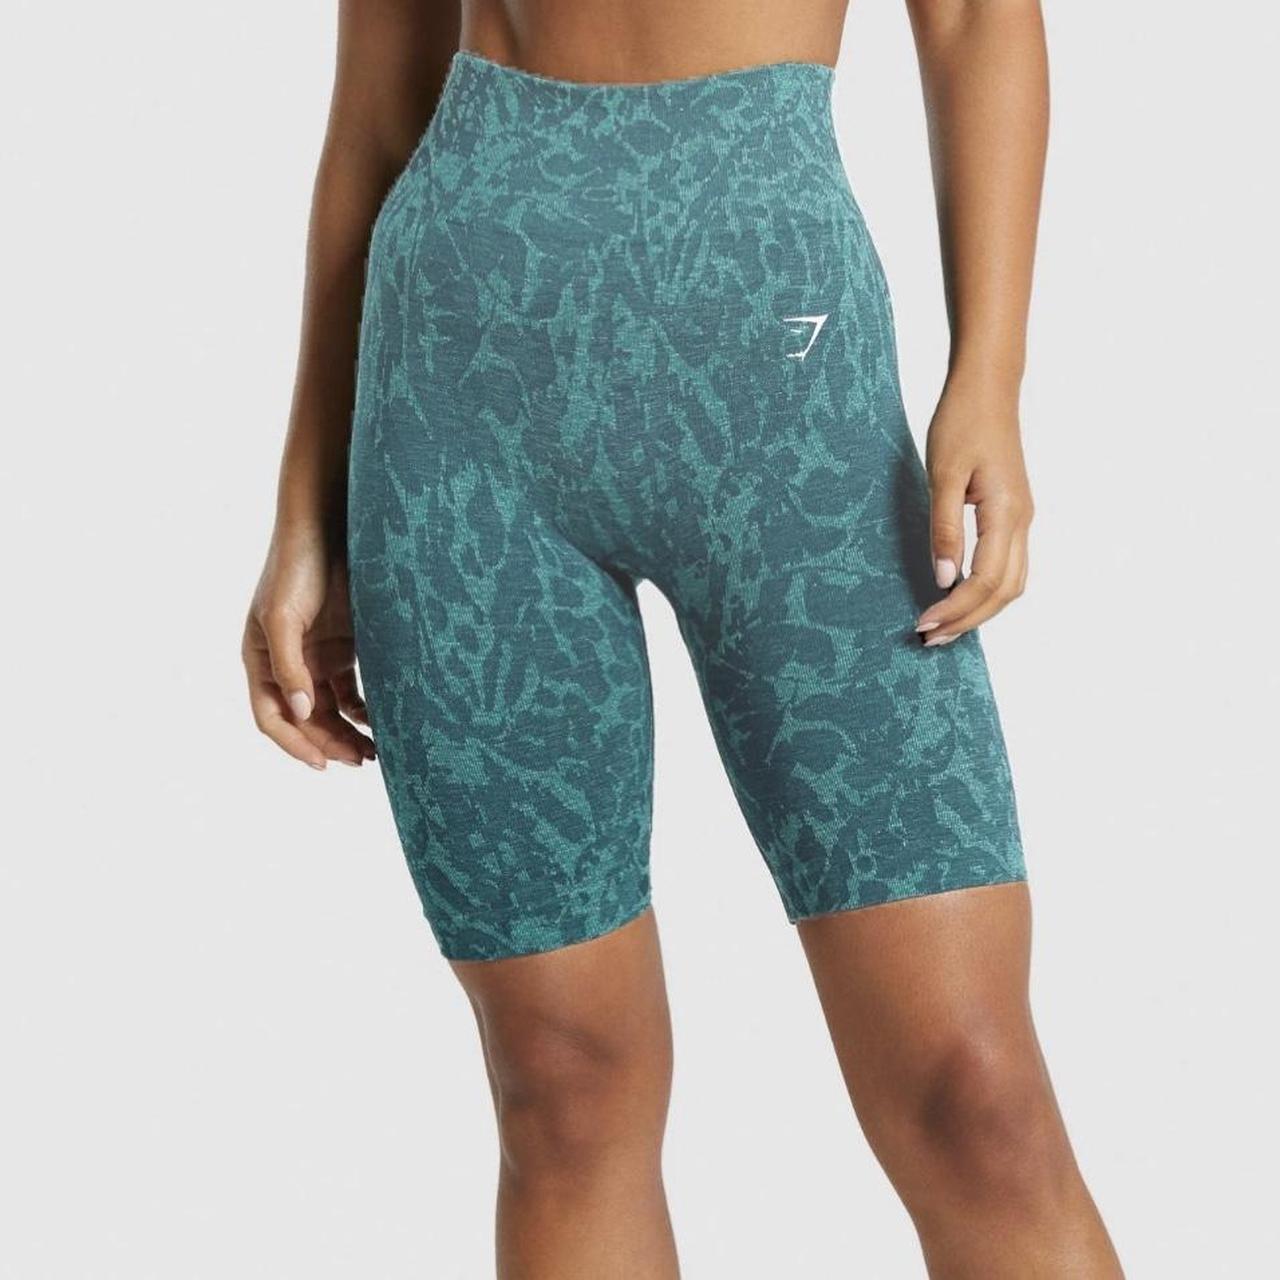 Gymshark Adapt Animal Seamless Cycling Shorts - Butterfly, Teal